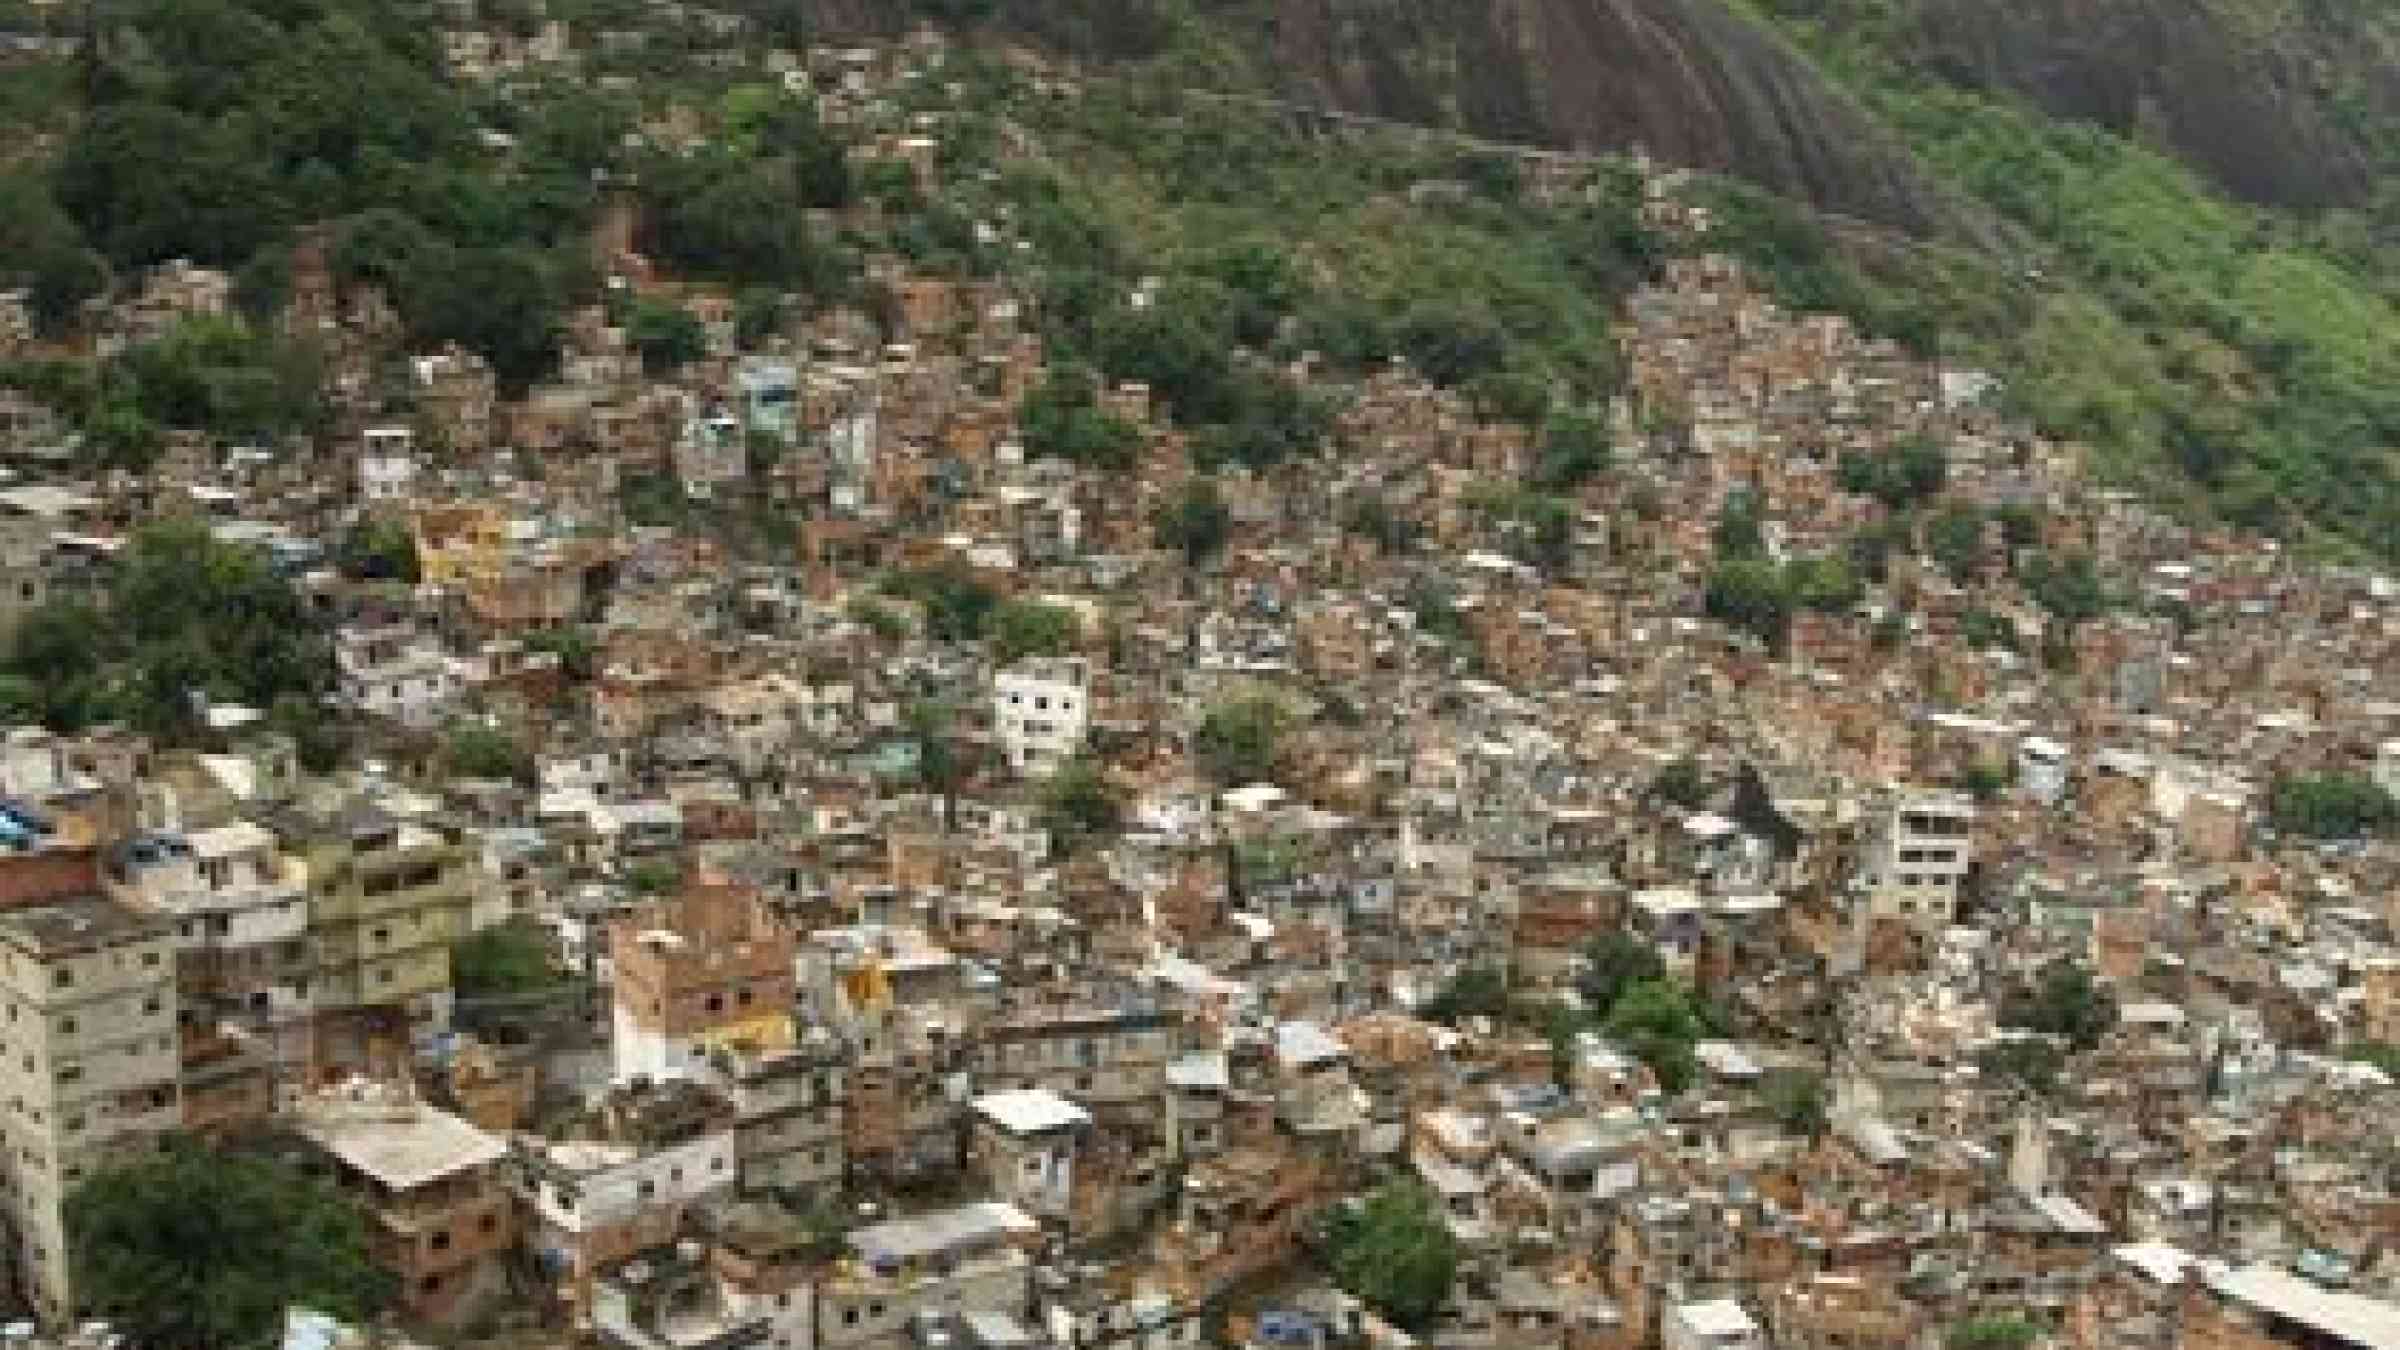 Poverty remains a big challenge in Latin America and the Caribbean.